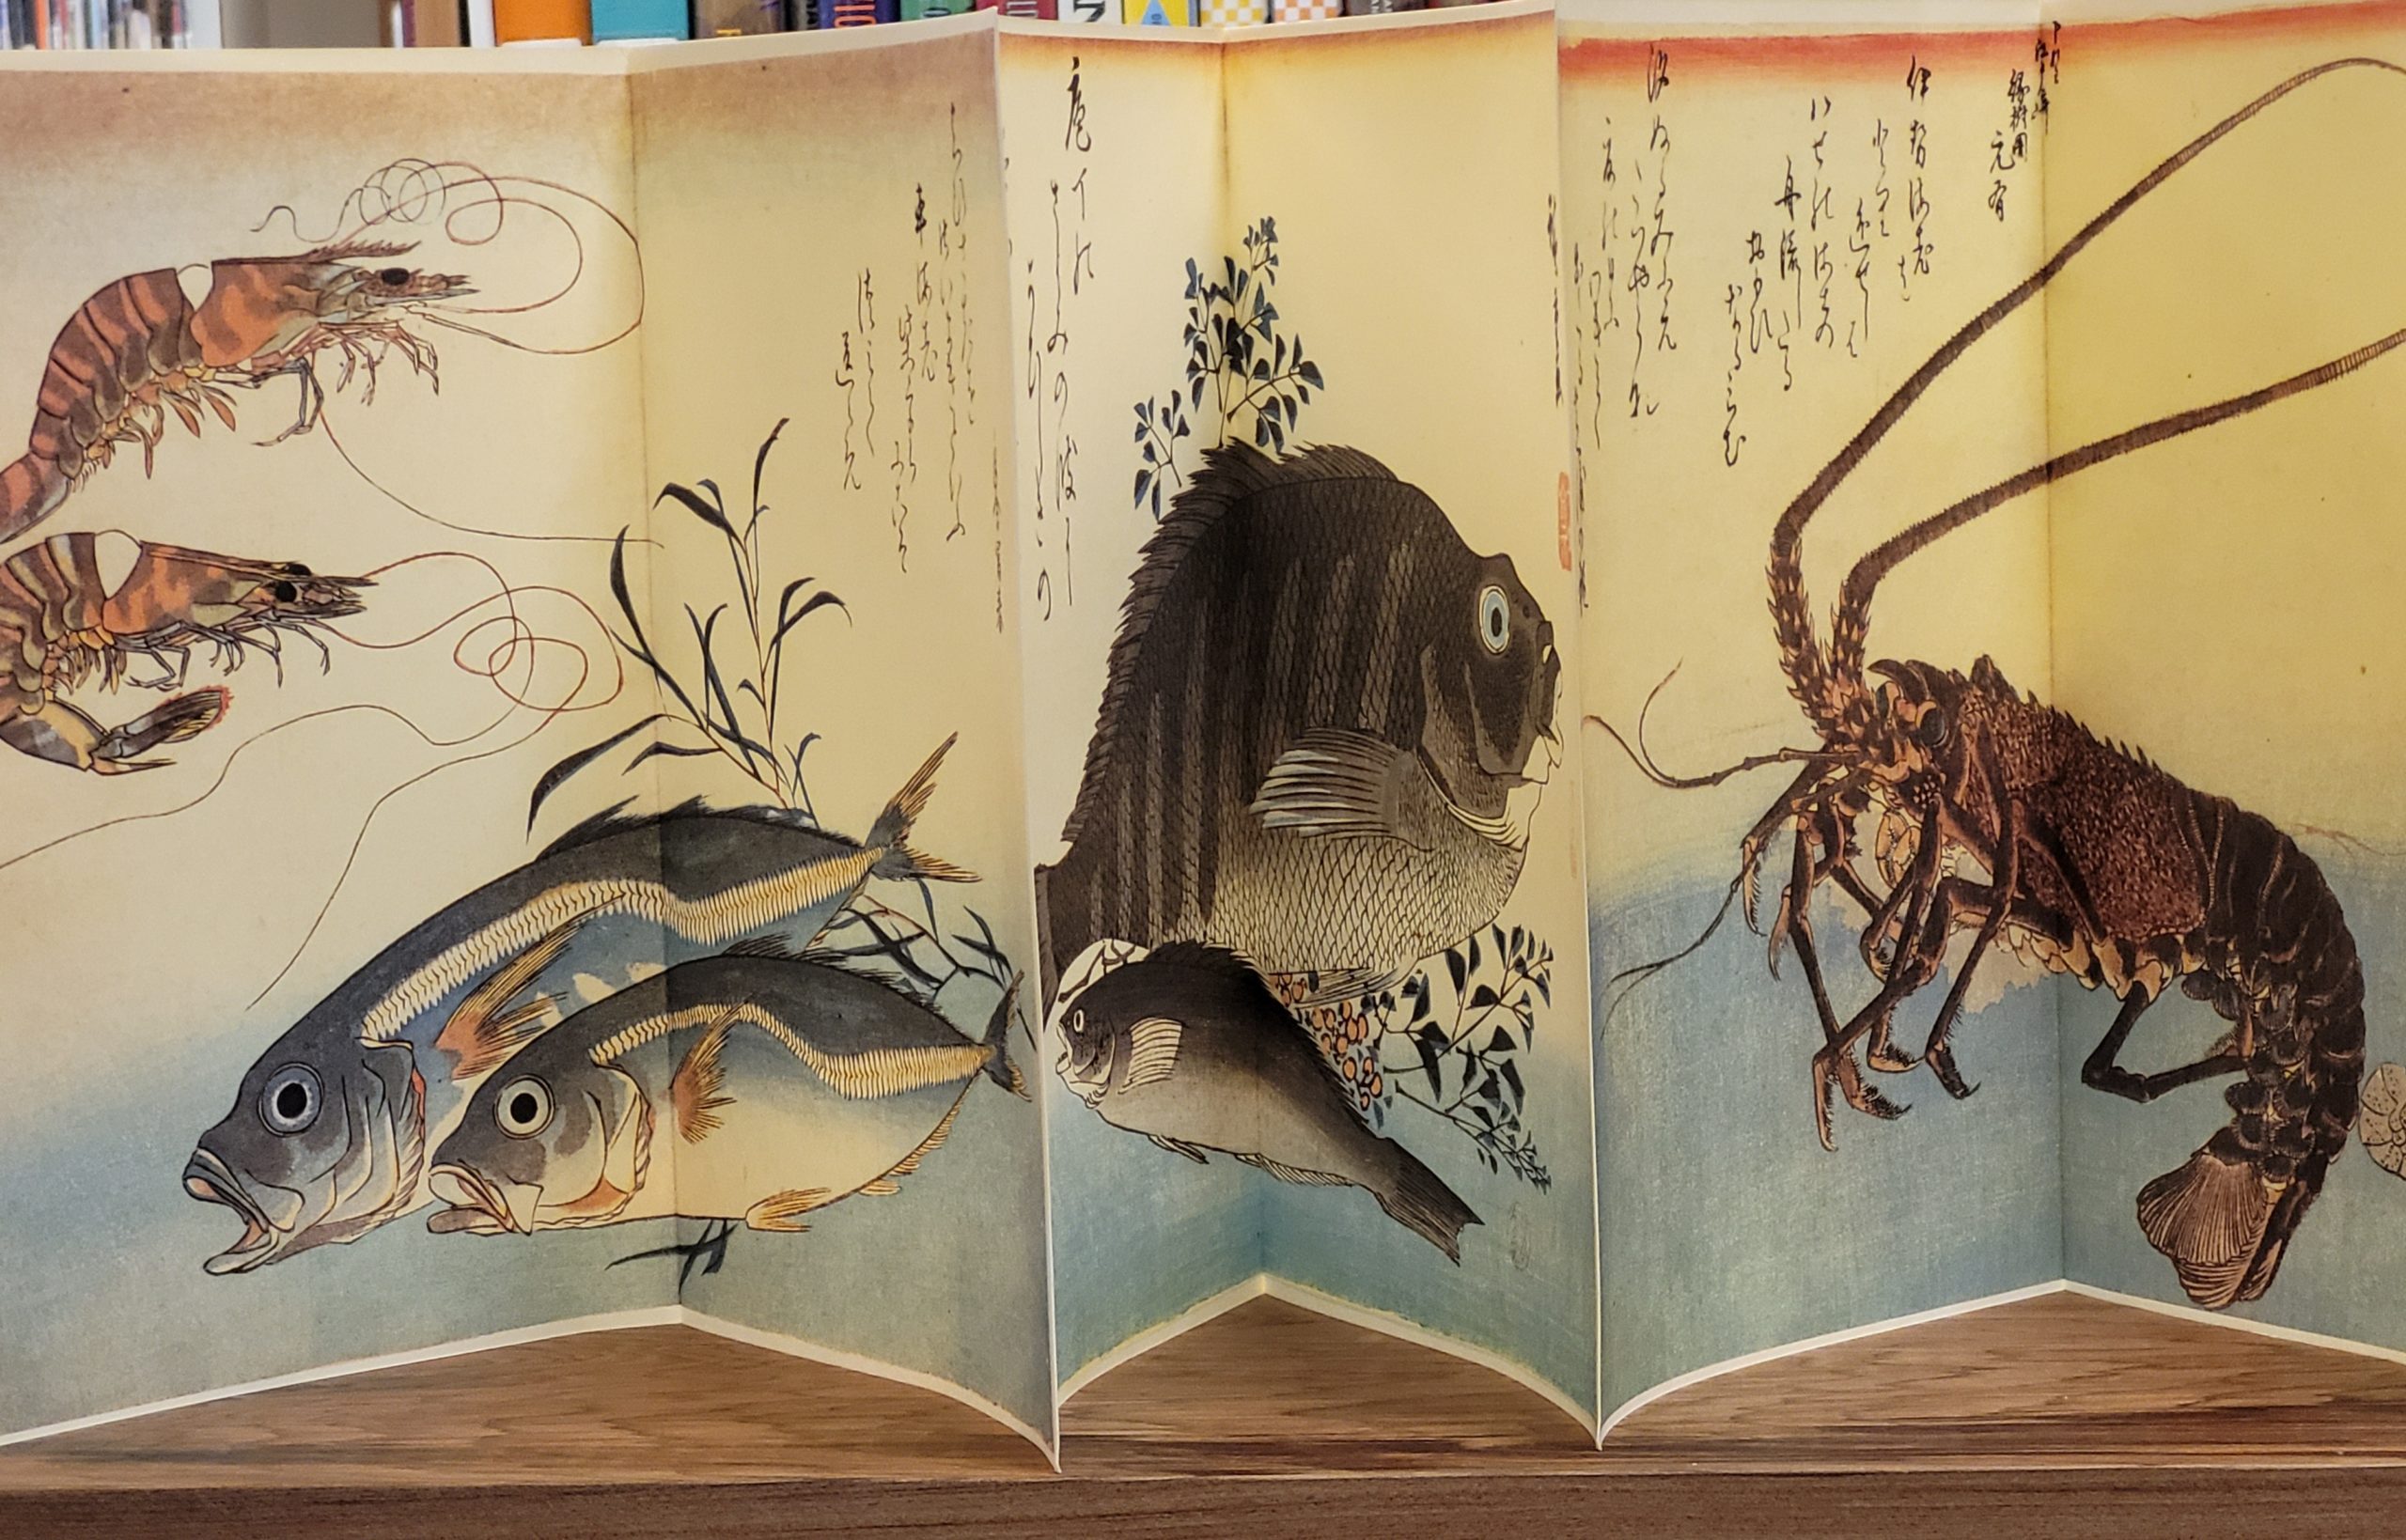 Hiroshige's stunning "A Shoal of Fishes" accordion book